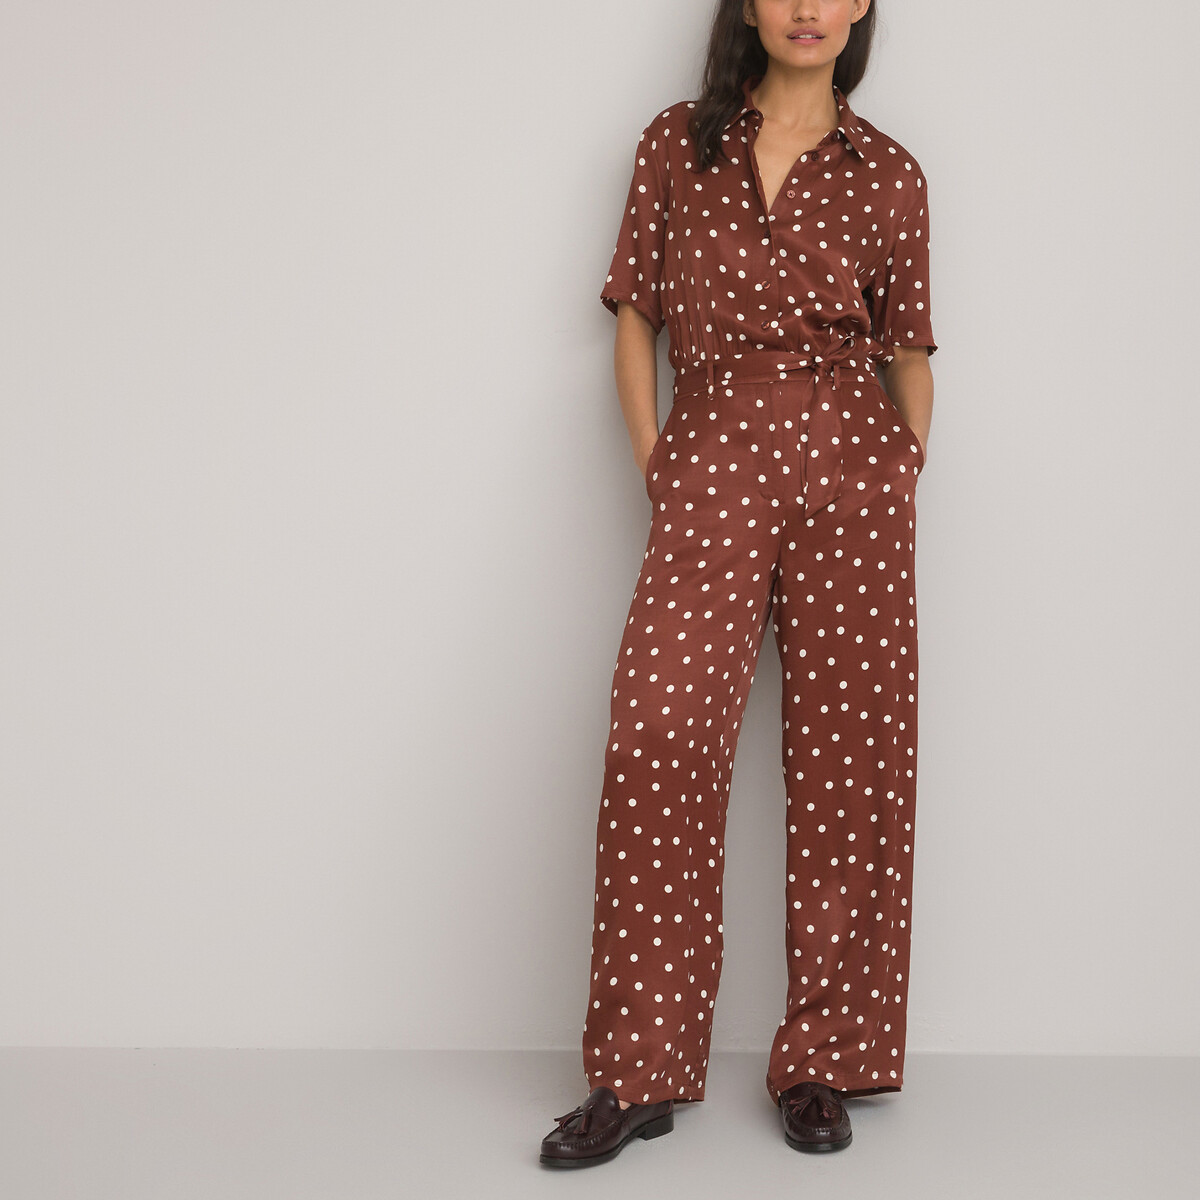 Polka Dot Jumpsuit with Short Sleeves